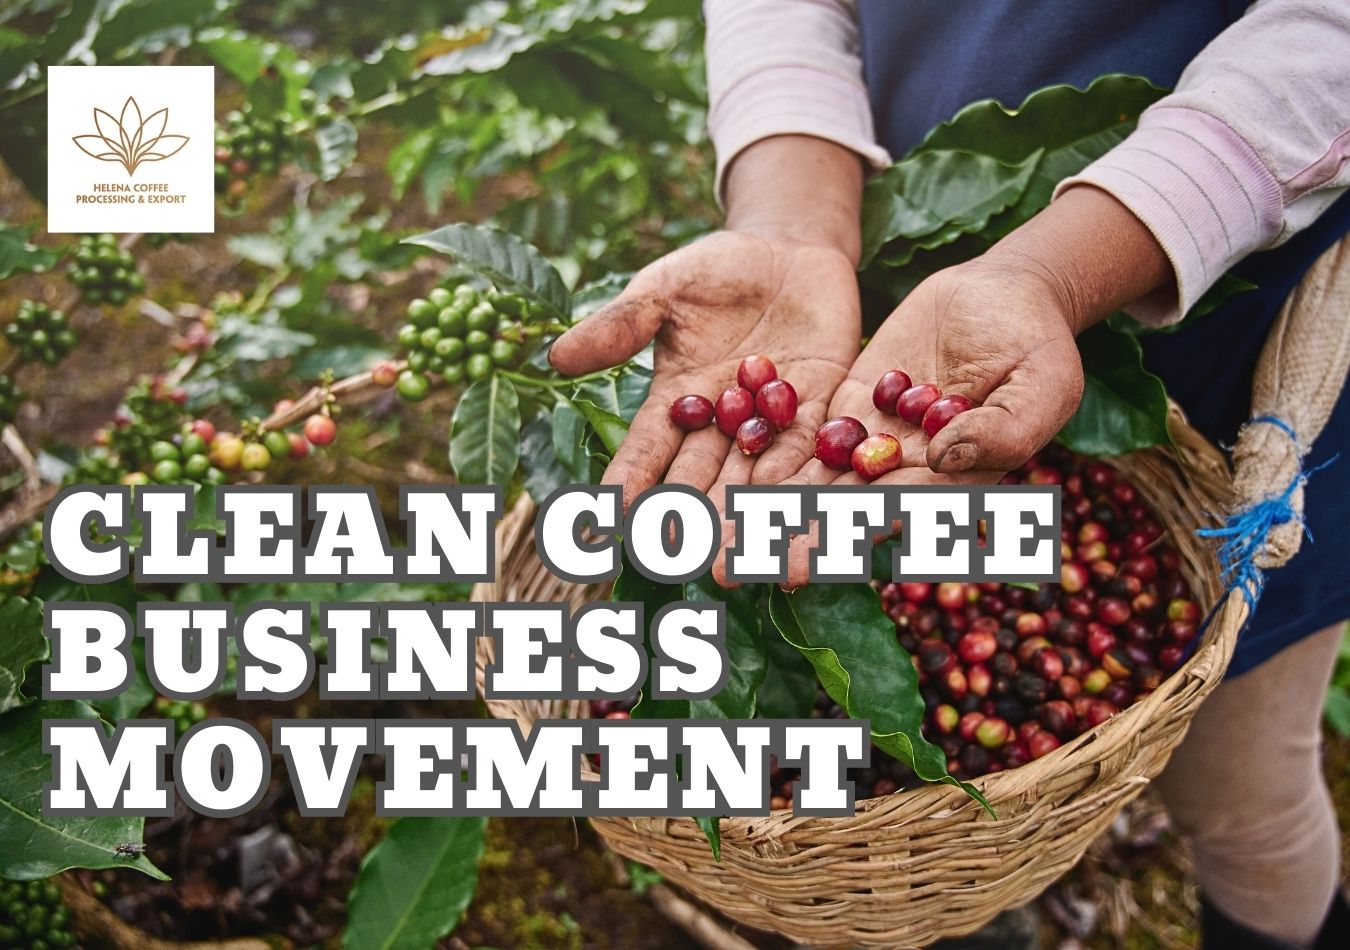 The Coffee Movement